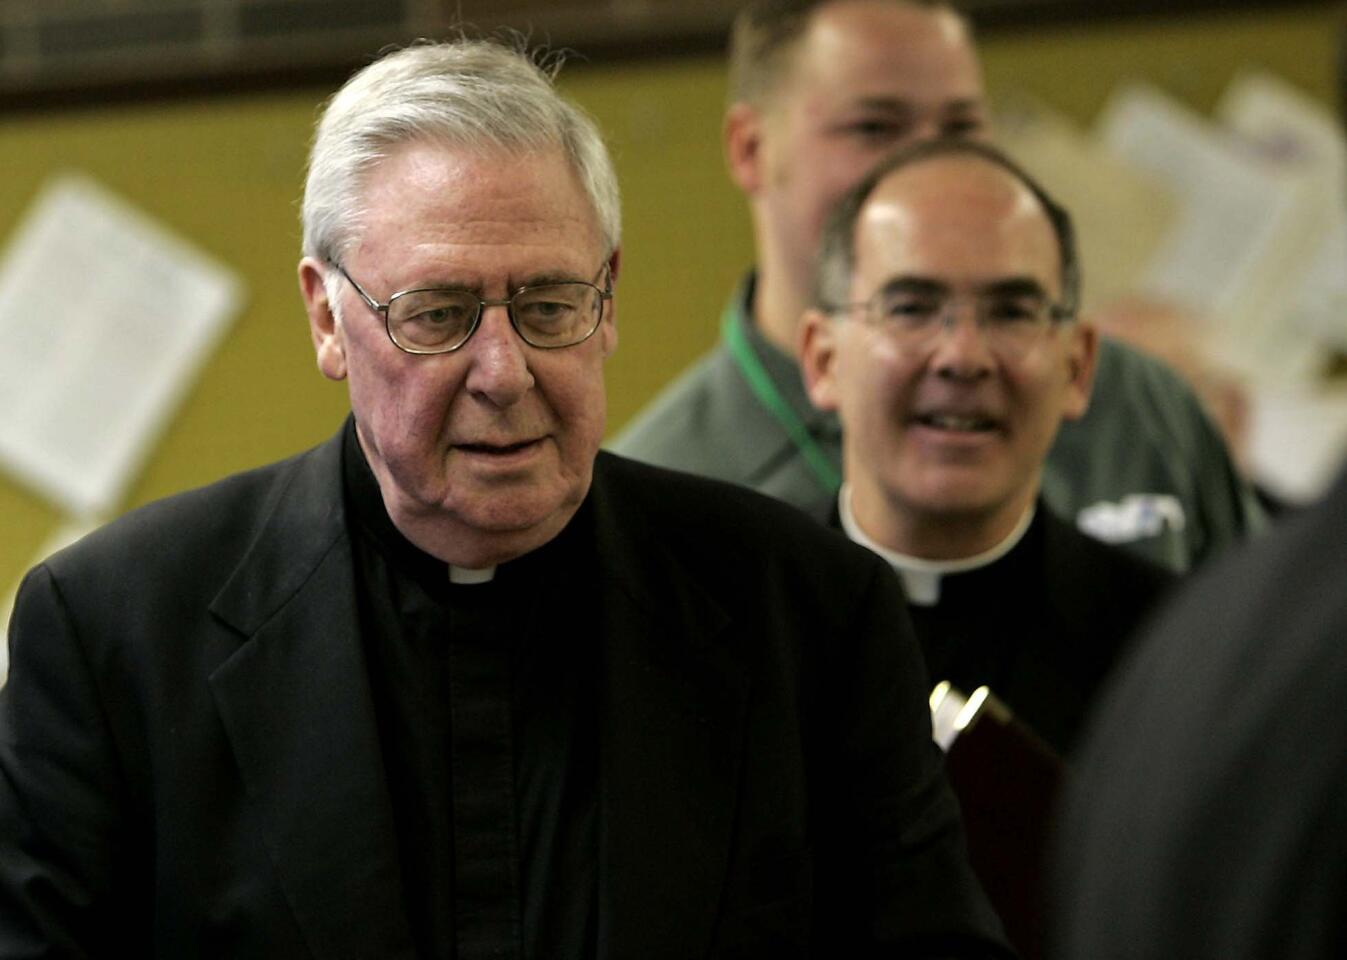 Bishop Joseph Imesch, left, whose 27-year tenure over the Joliet Diocese was tarnished by his actions in connection with the Catholic Church's priest sex-abuse scandal, died Dec. 22 at age 84. Read the obituary